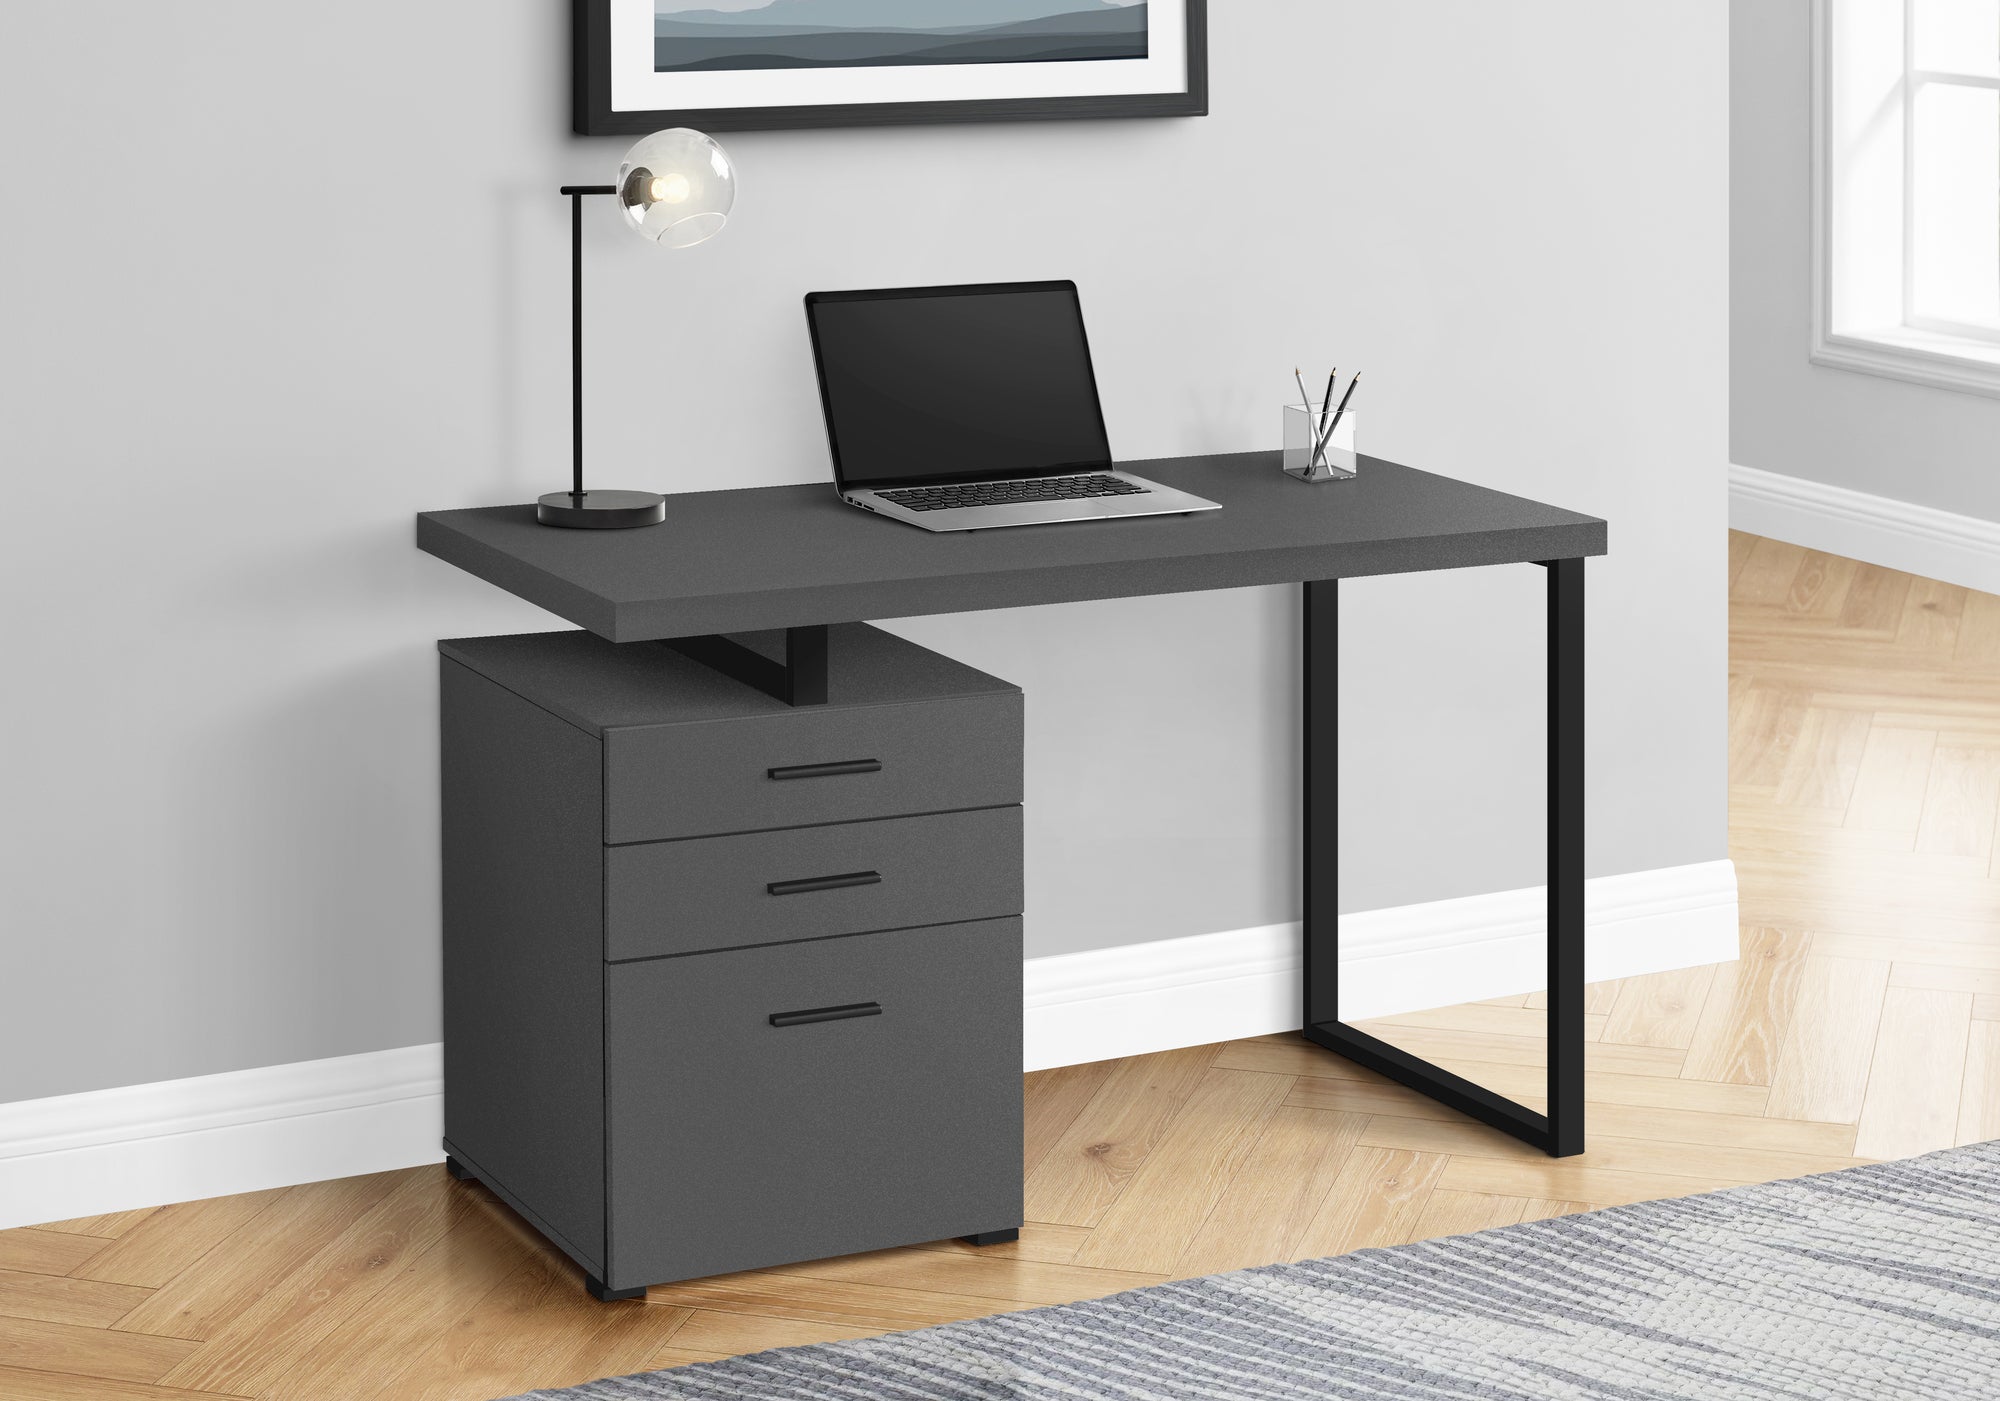 MN-517645    Computer Desk, Home Office, Laptop, Left, Right Set-Up, Storage Drawers, 48"L, Metal, Laminate, Grey, Black, Contemporary, Modern